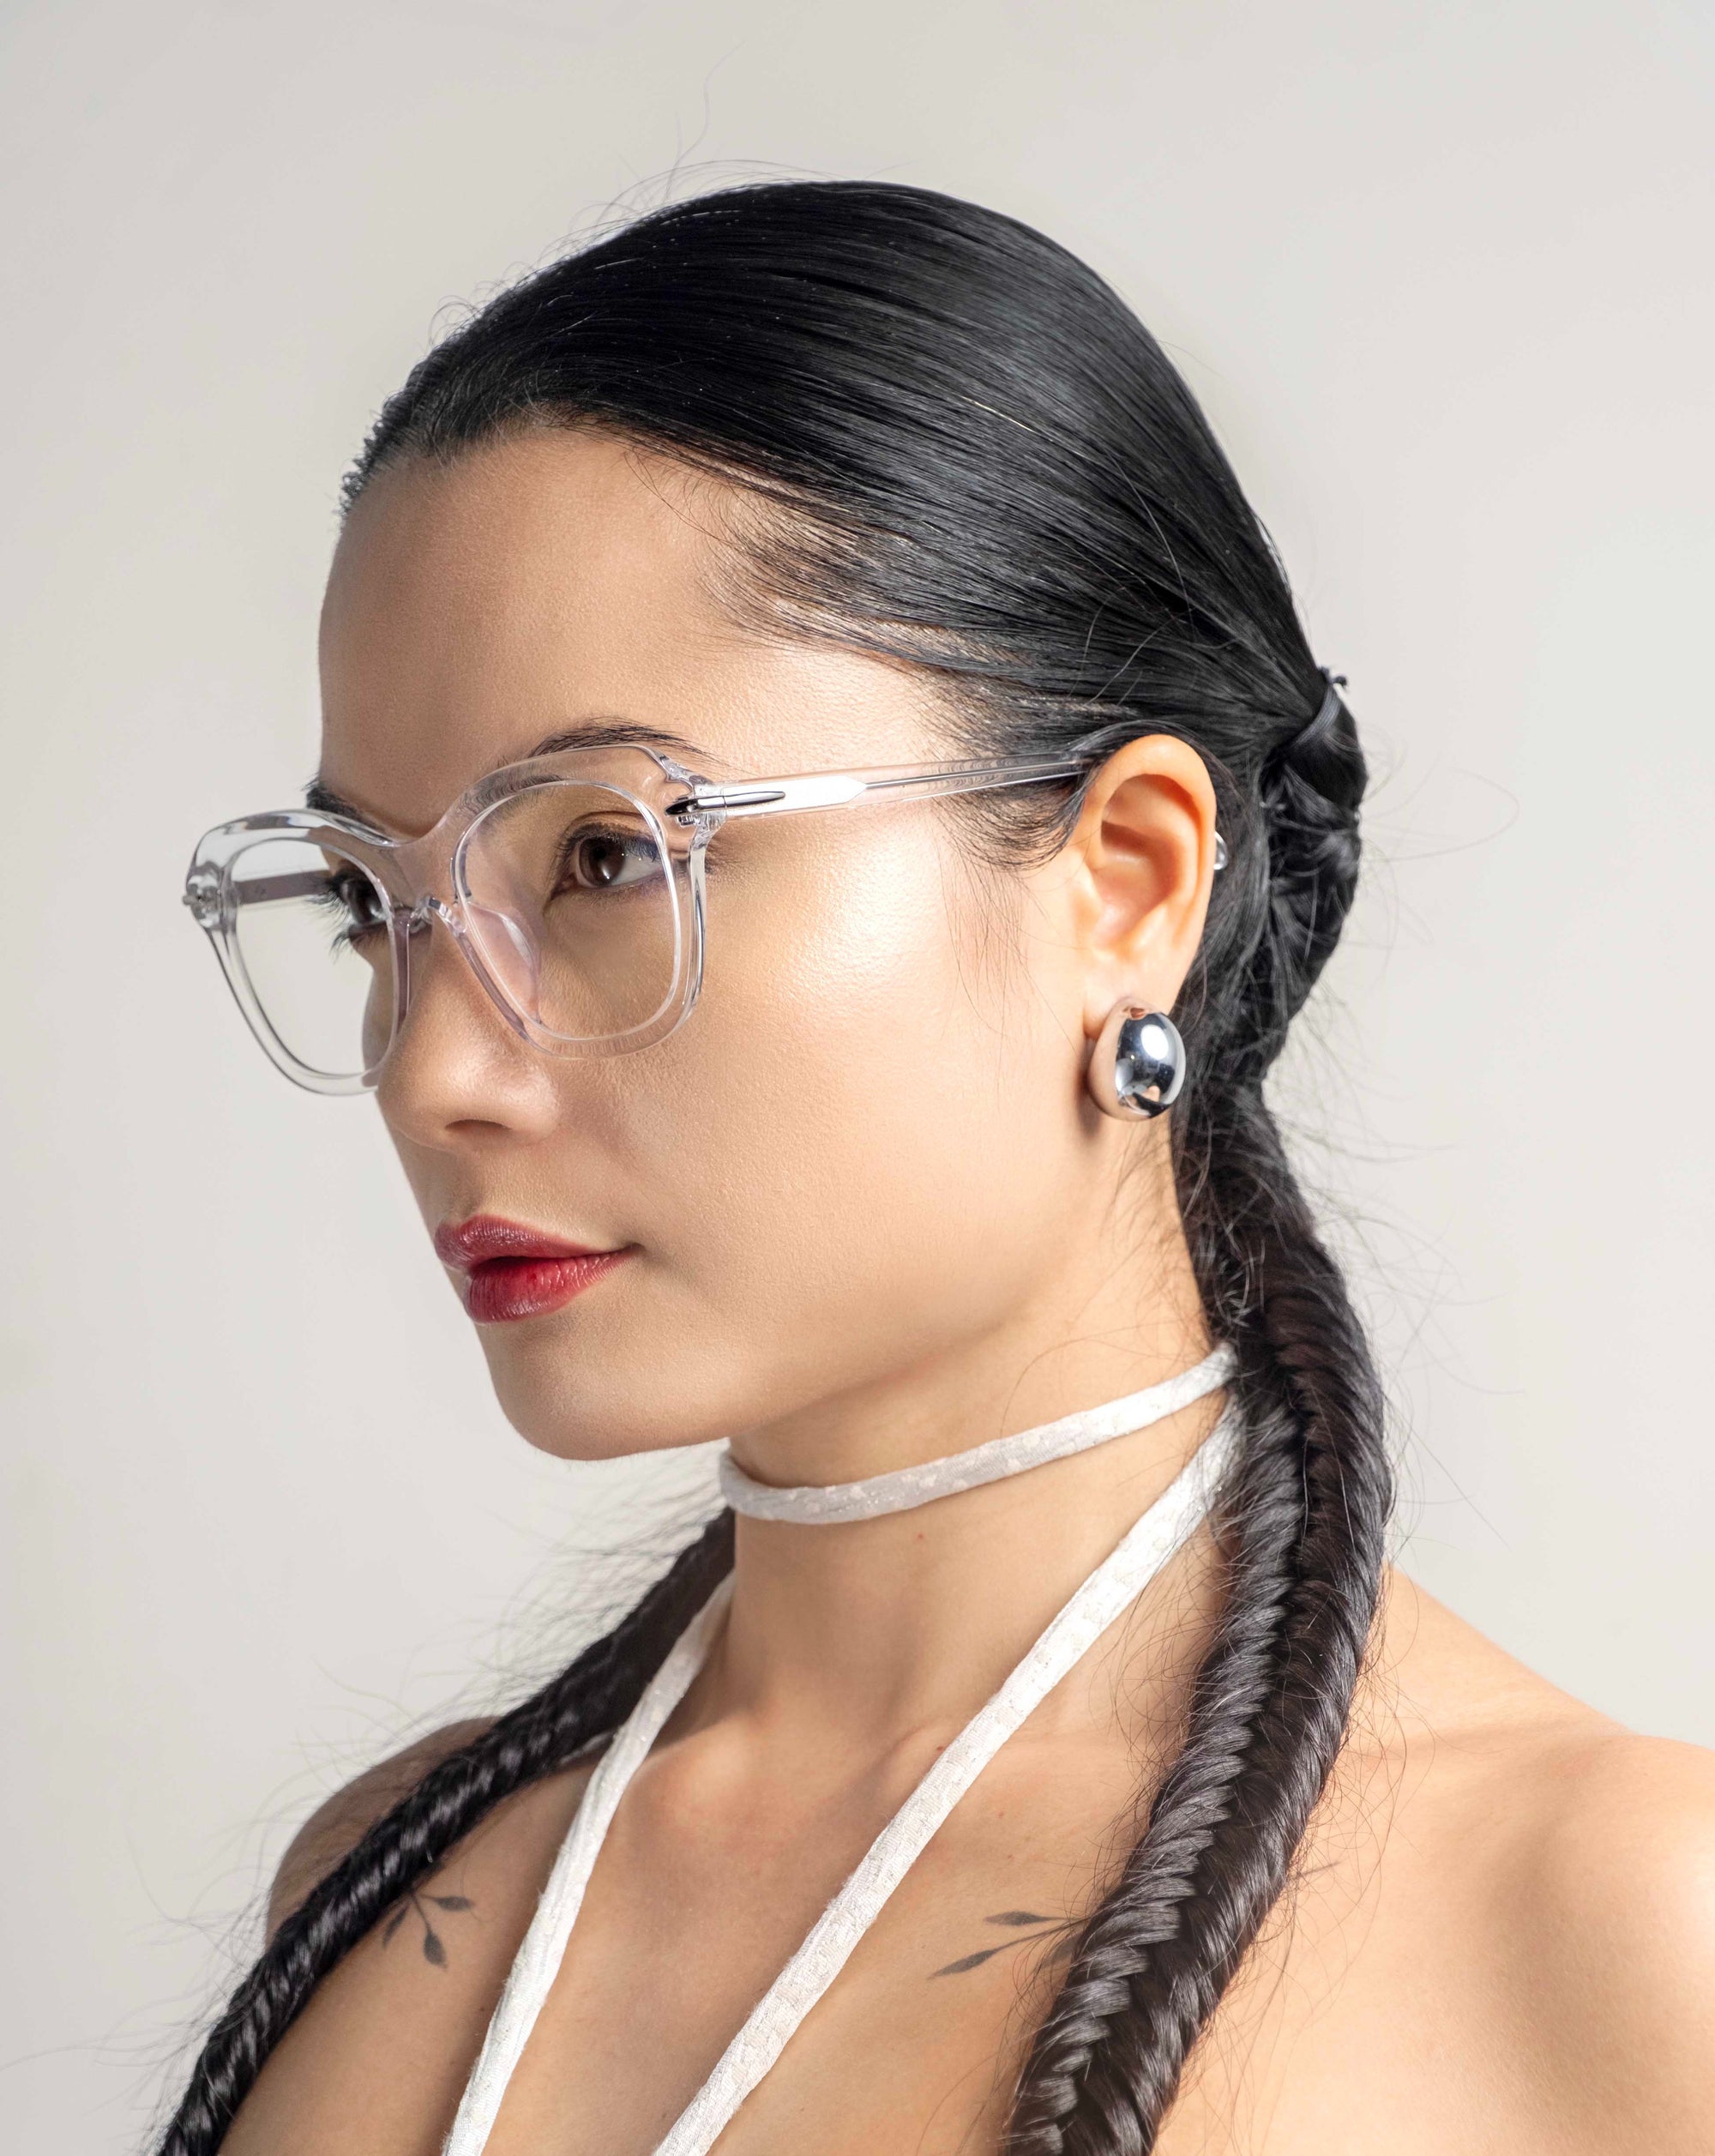 A person with long, dark braided hair, wearing clear-framed, cat-eye silhouette glasses and a white halter strap, is pictured in a profile view against a plain background. They have a calm expression with shiny Helene earrings by For Art&#39;s Sake® visible.